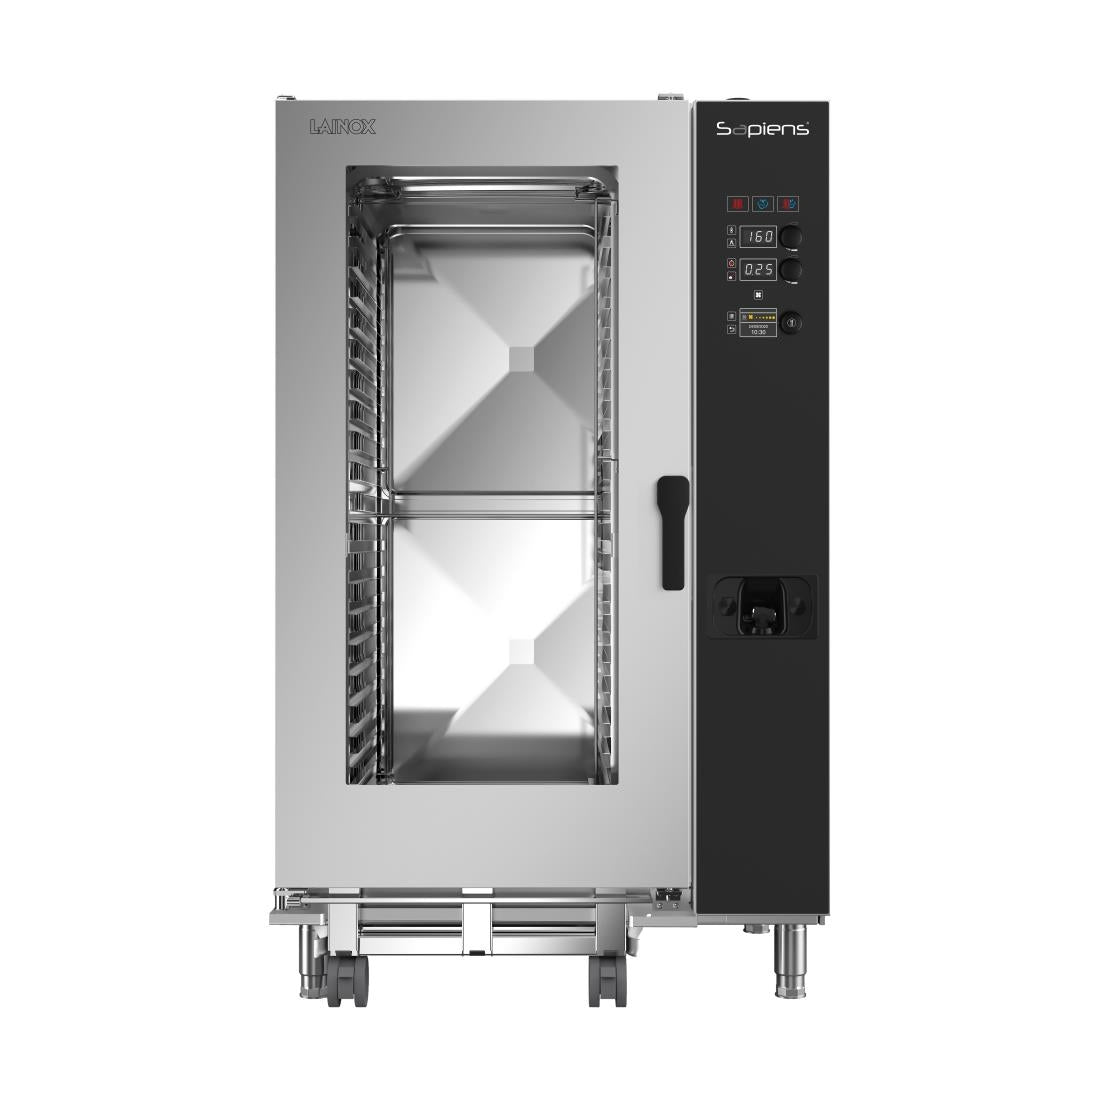 HP574 Lainox Sapiens Boosted Electric Touch Screen Combi Oven SAE202BS 20X2/1GN JD Catering Equipment Solutions Ltd